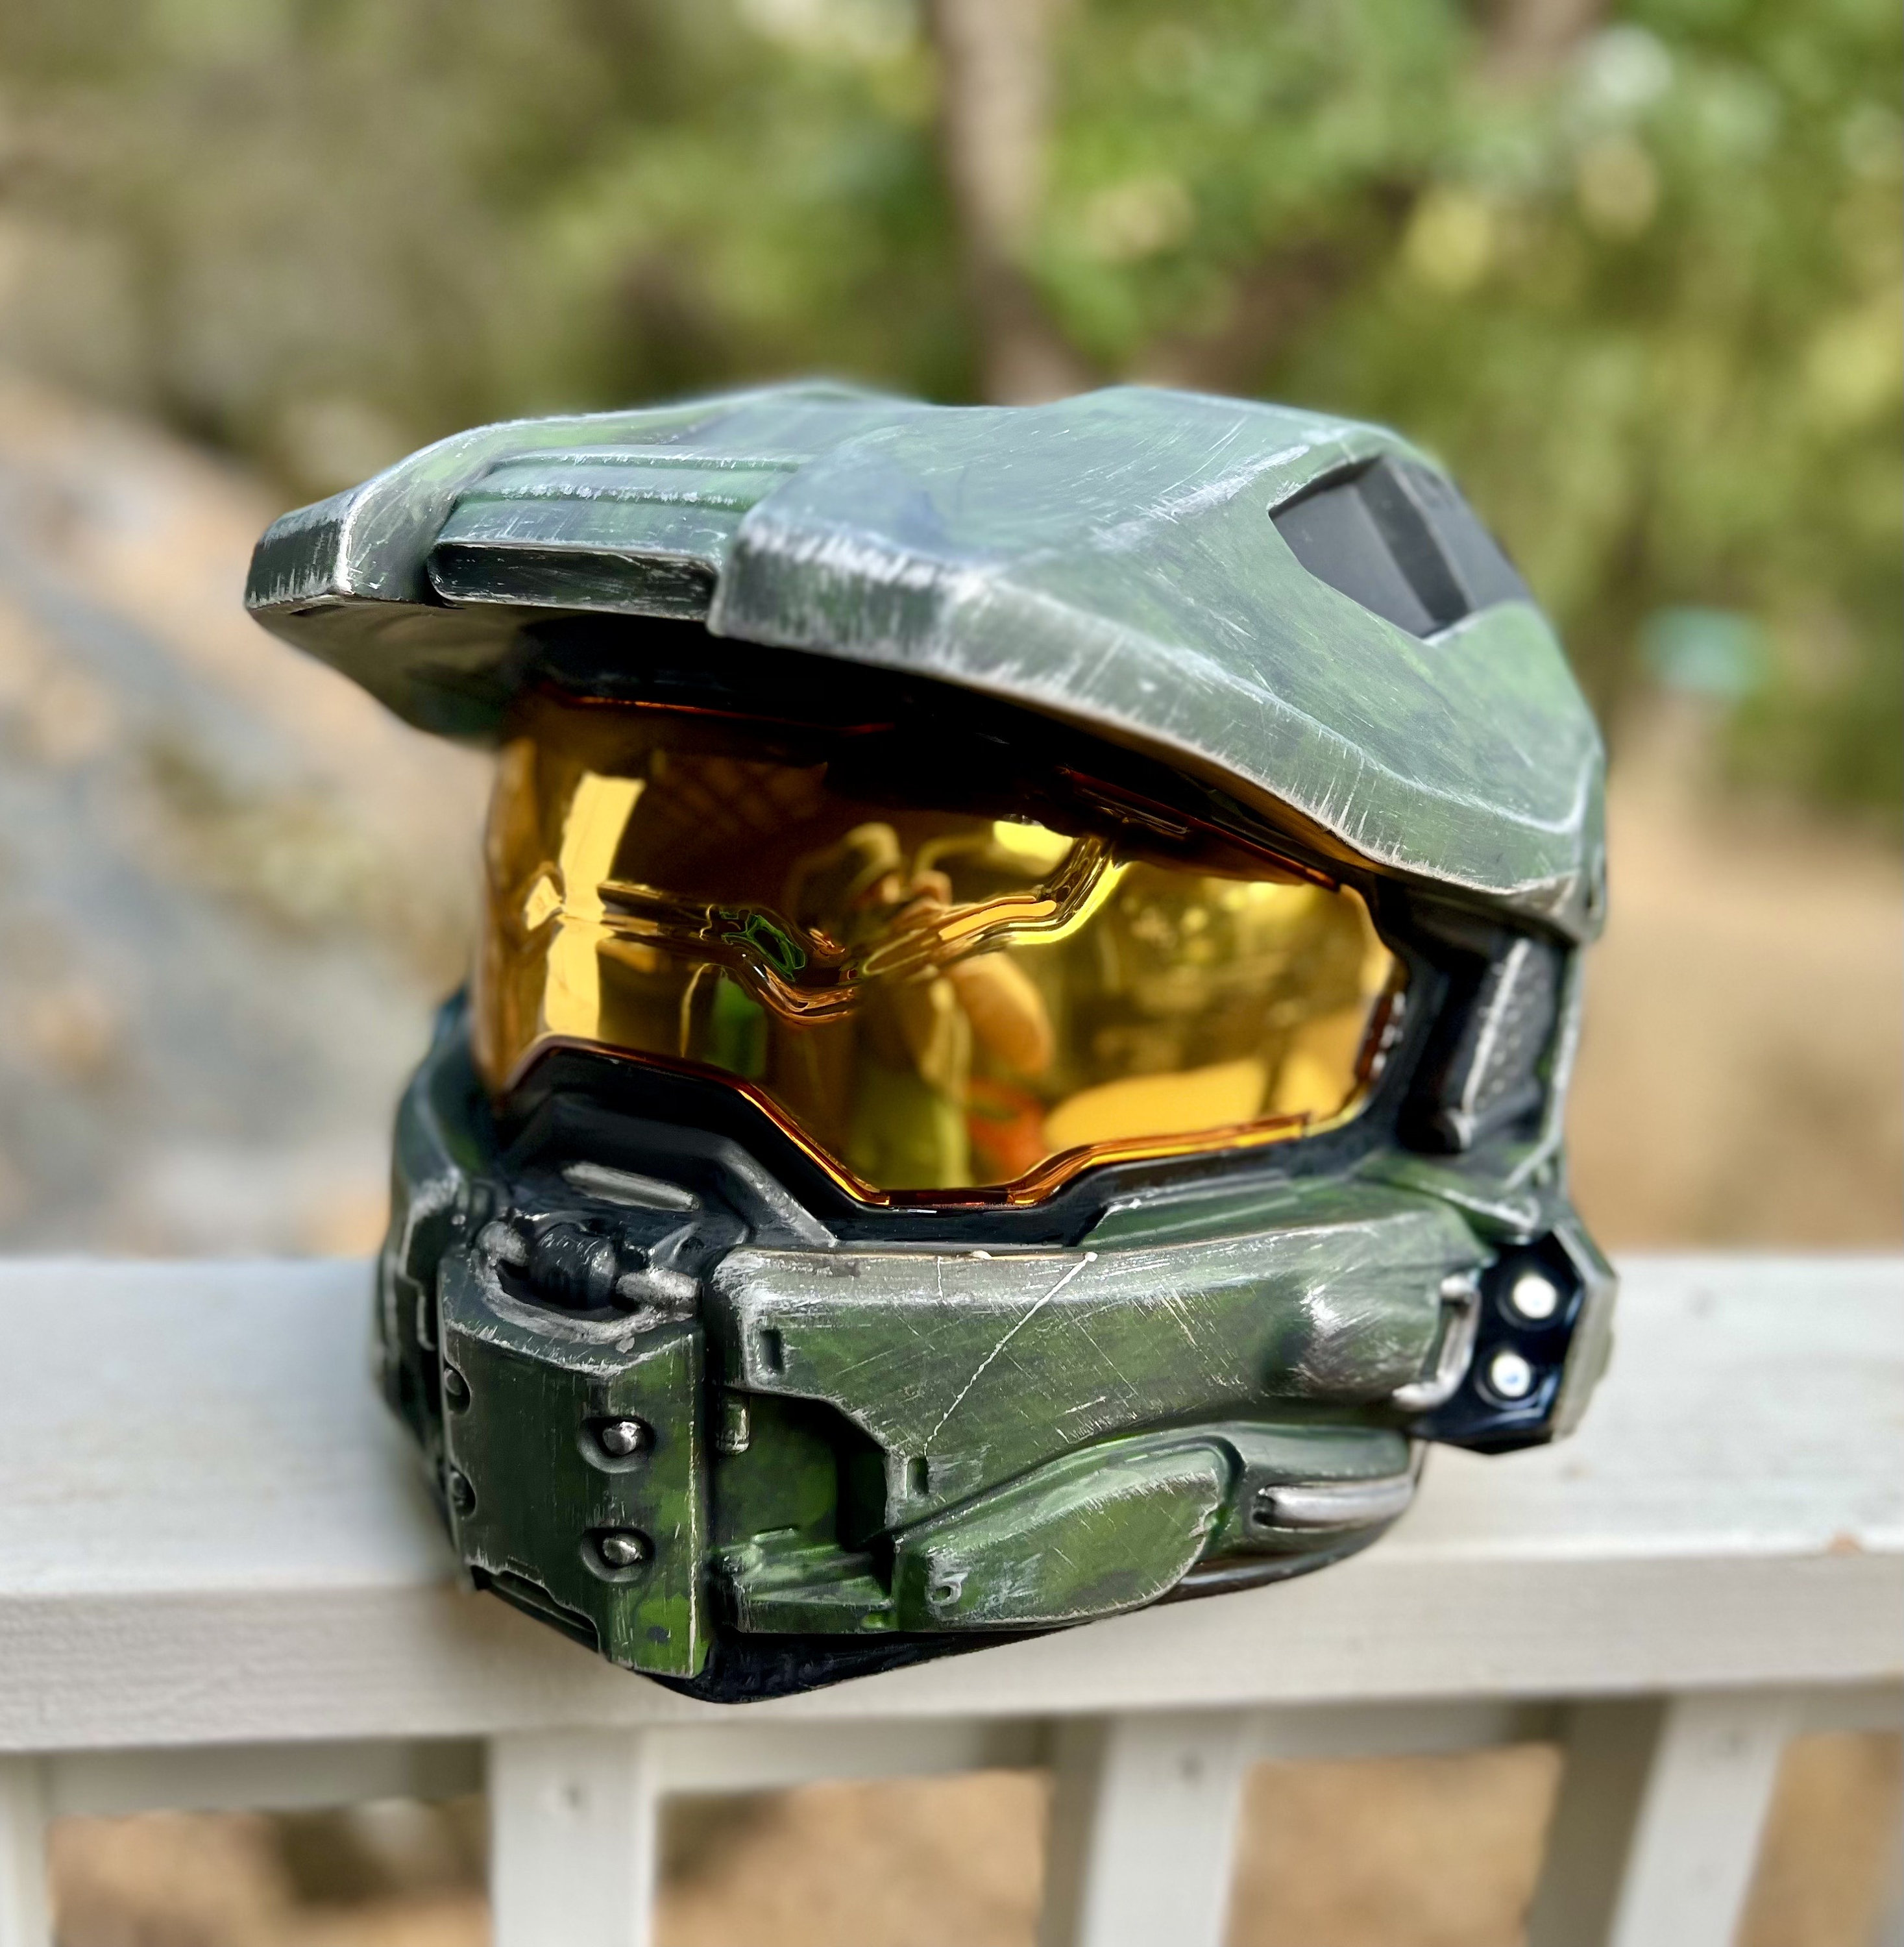 Master Chief Helmet Necklace, Halo Jewelry Collection